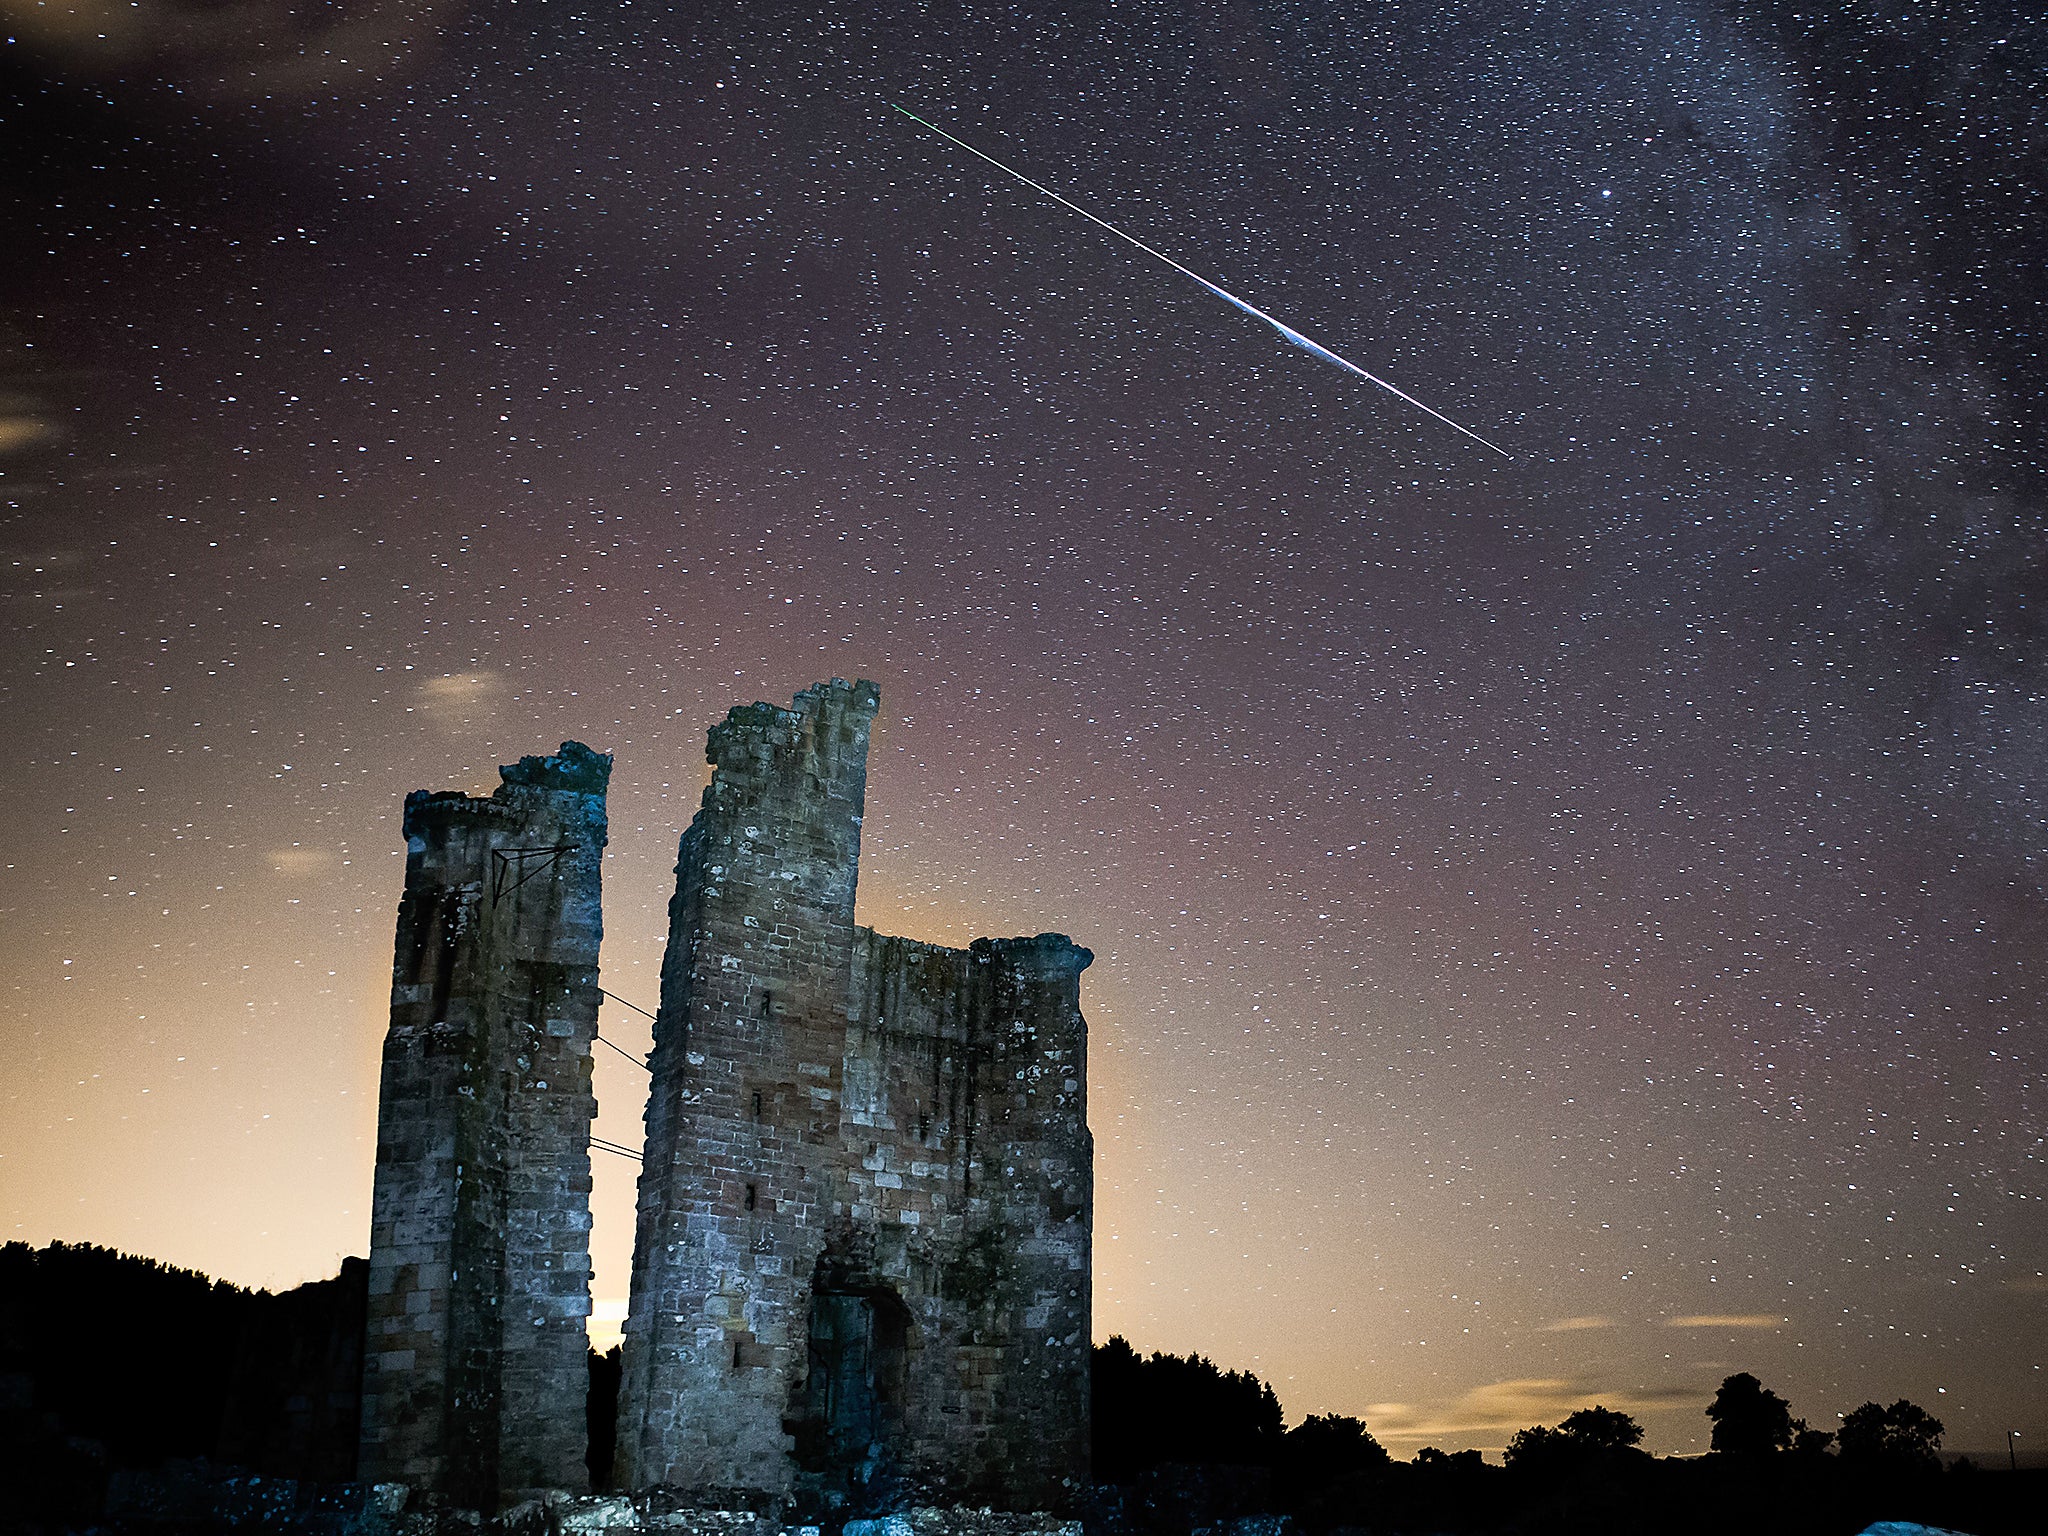 Astronomers says Brits' best chance of spotting meteor shower is in rural areas with minimal light pollution